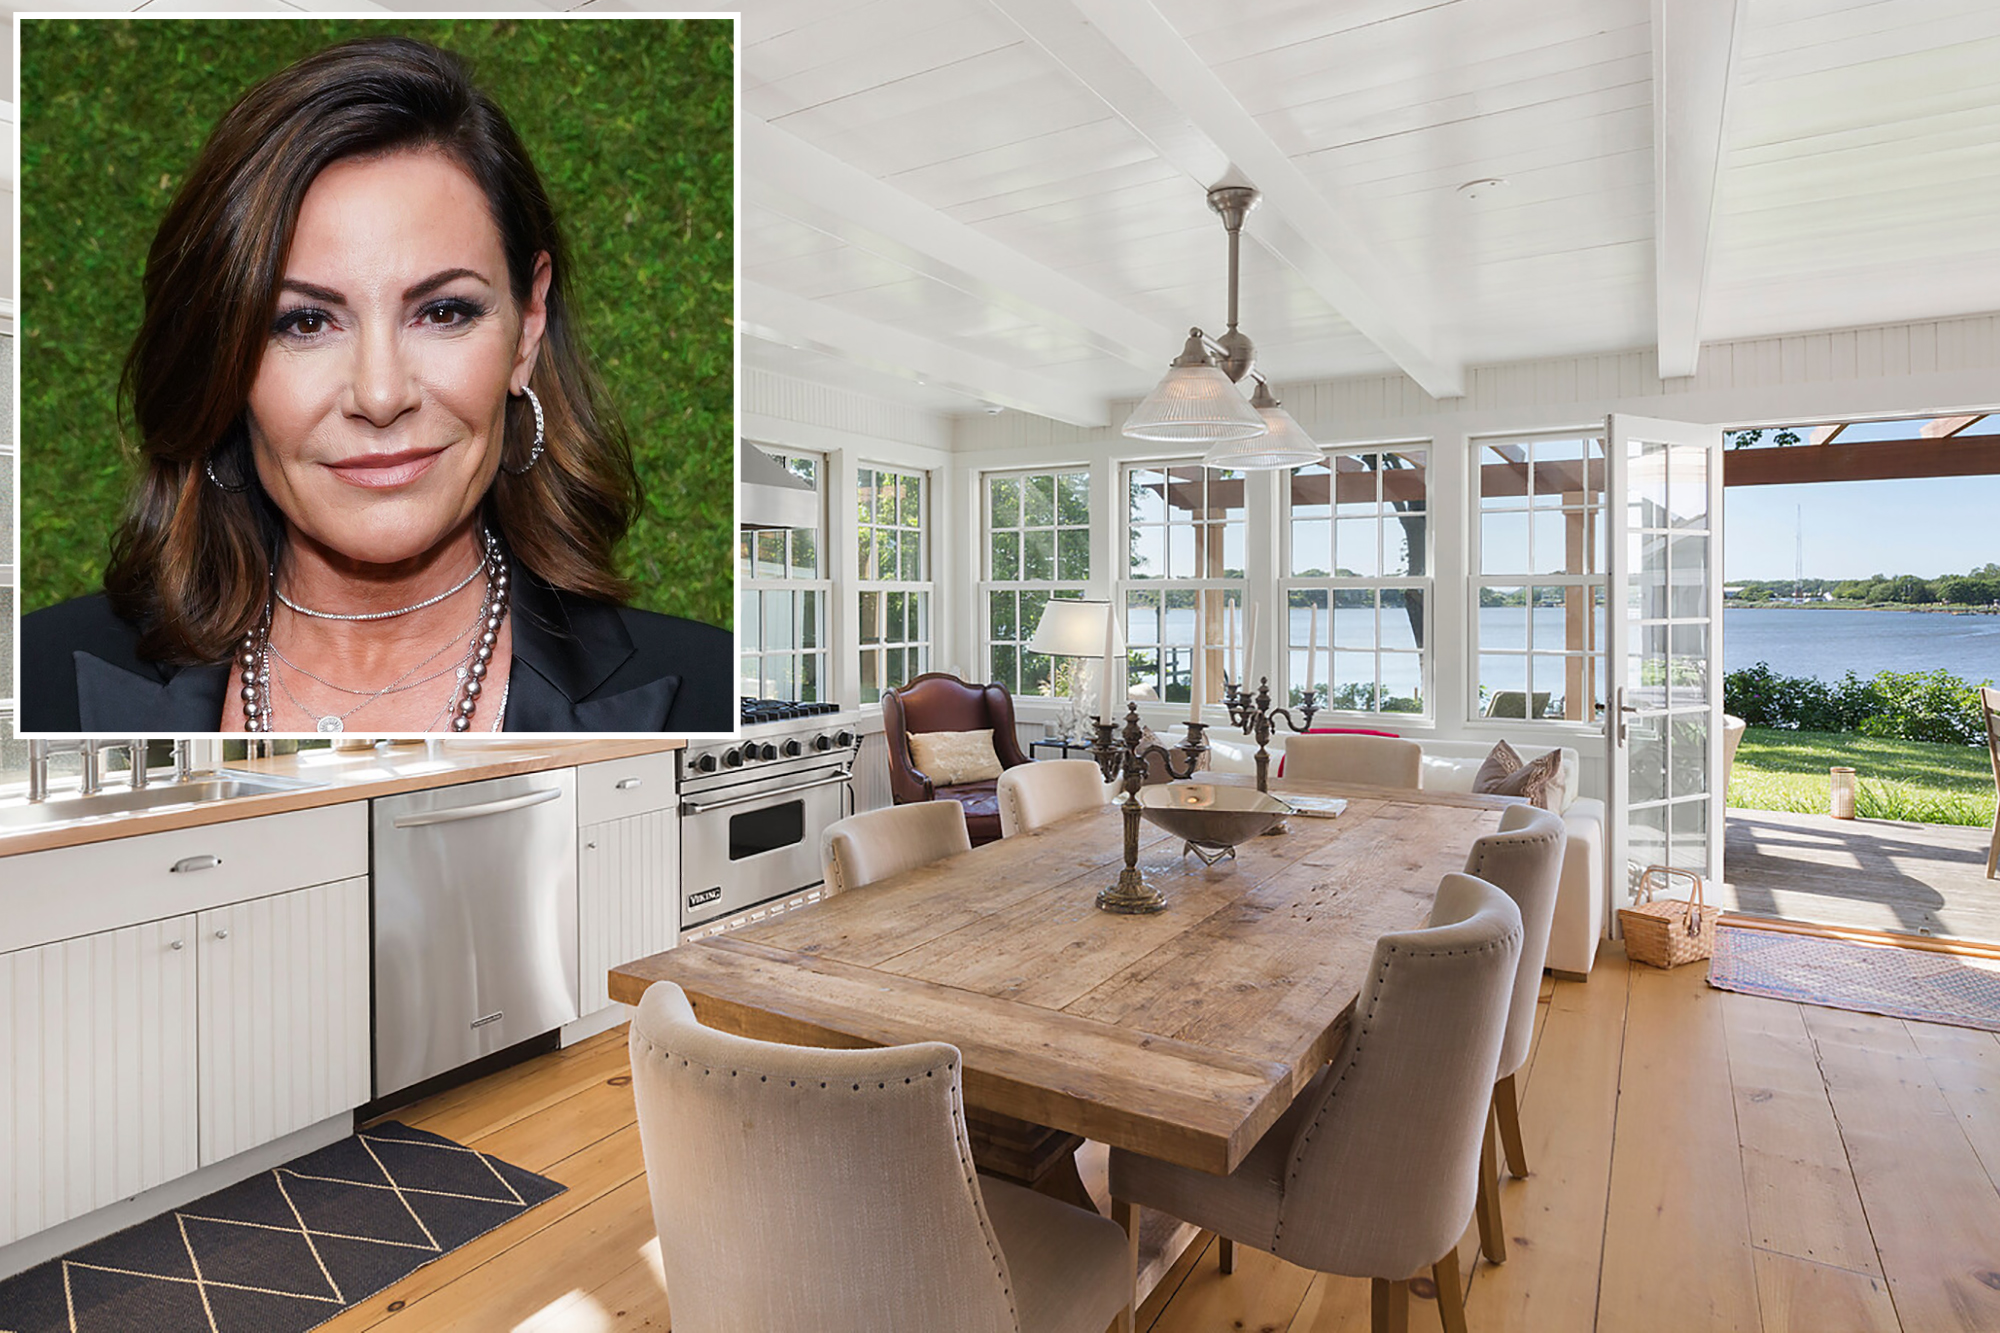 ‘Real Housewives’ star LuAnn de Lesseps is renting her Sag Harbor home